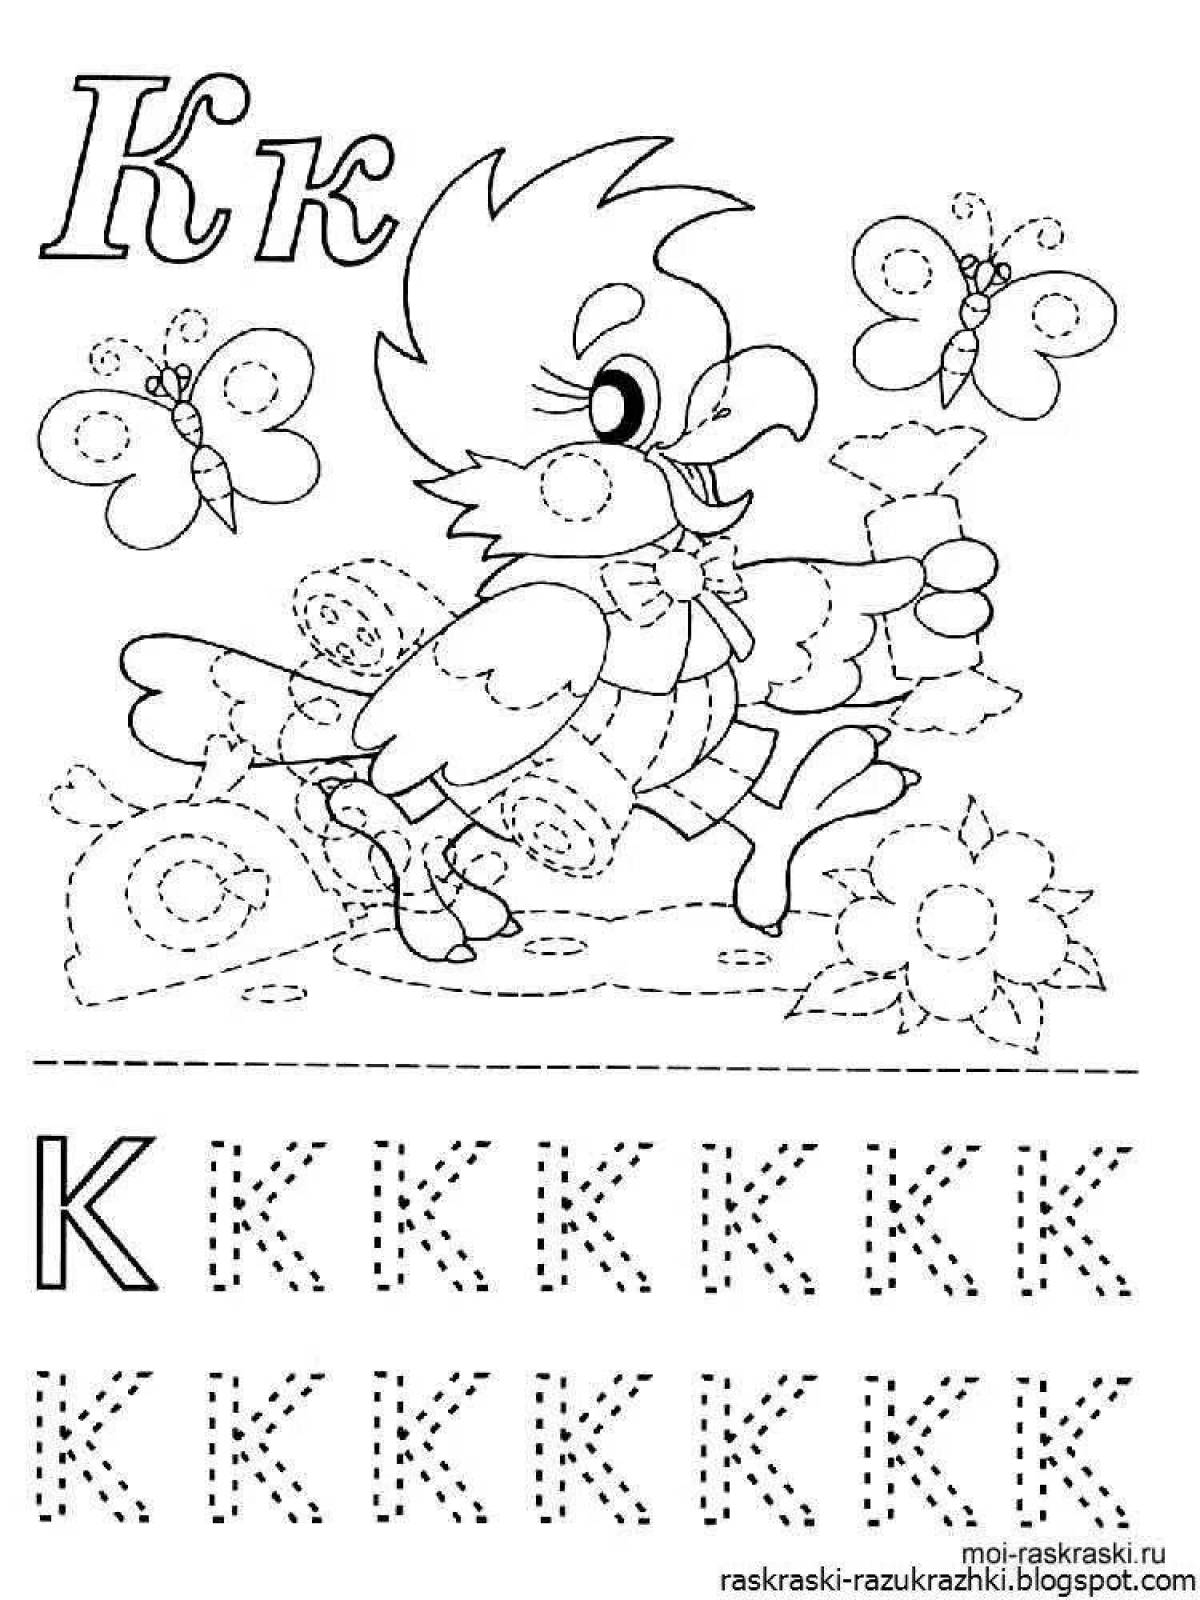 Joyful coloring book with letters for children 5-7 years old